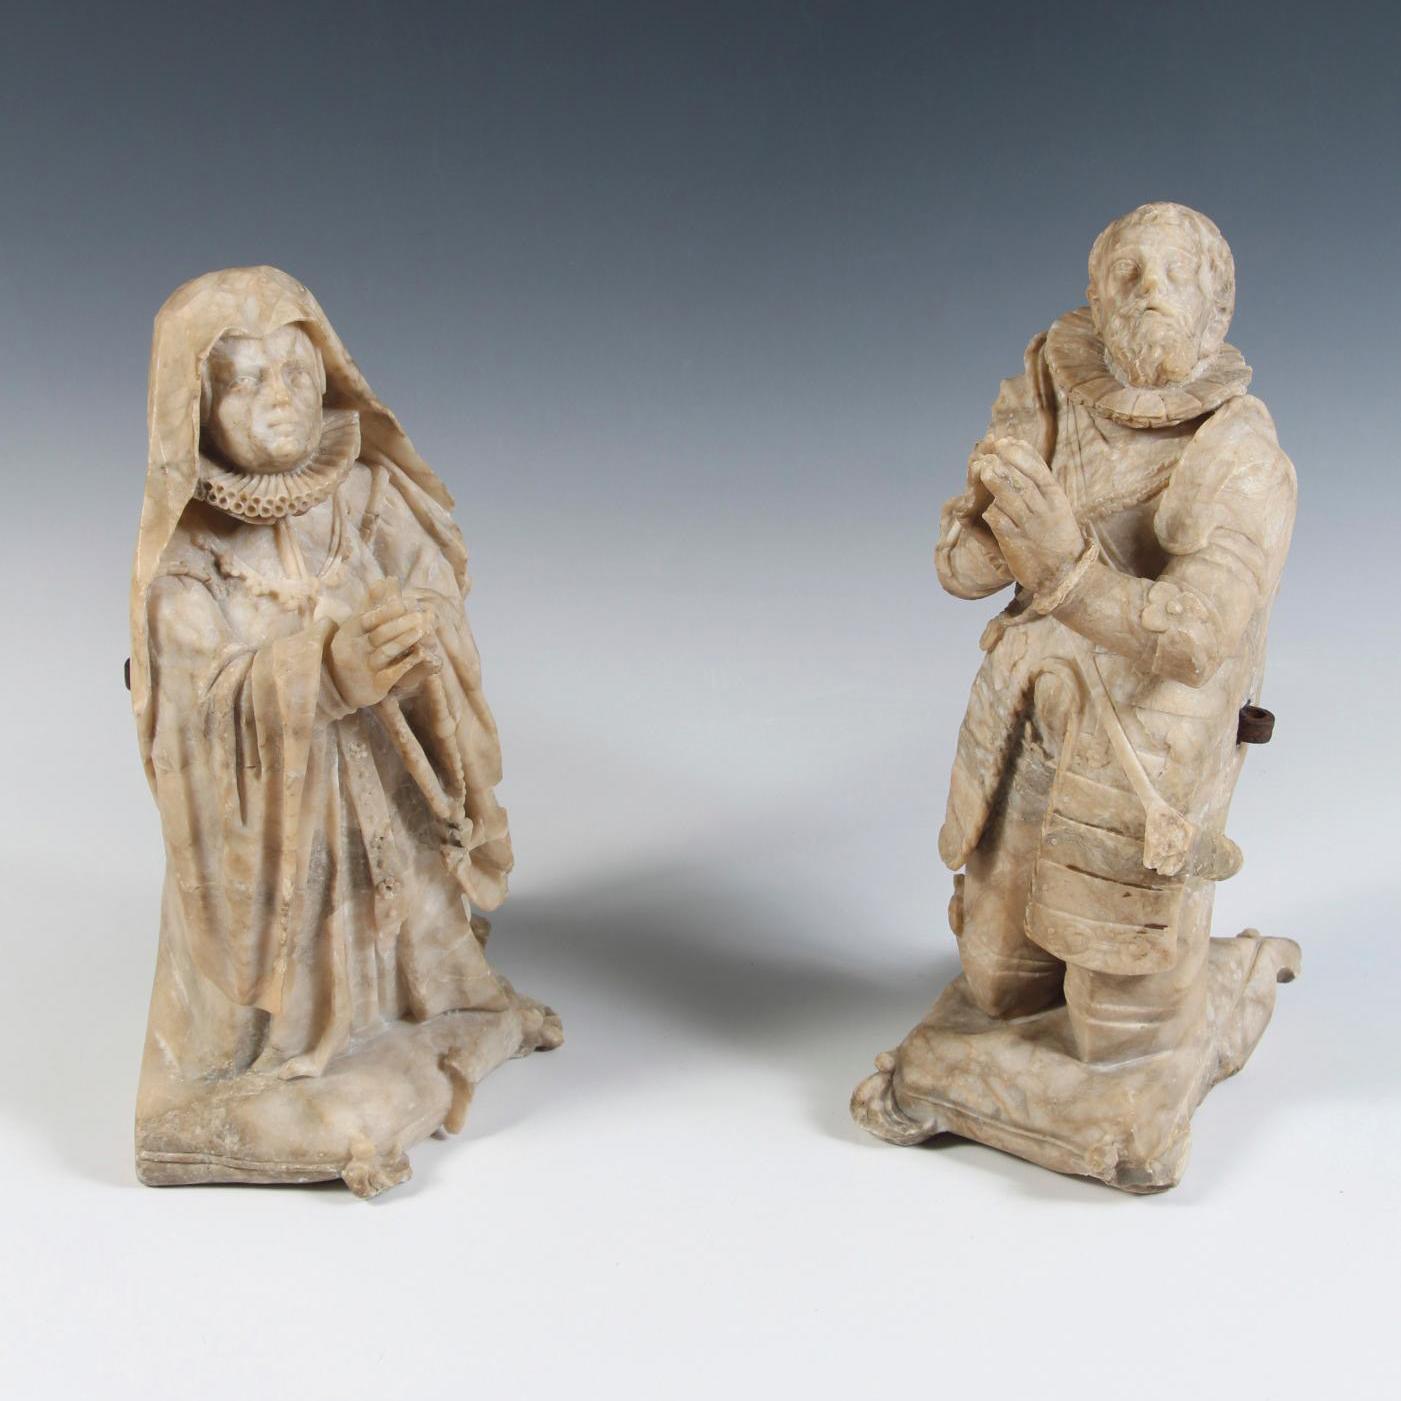 16th-Century Alabaster Statues with a Glowing Provenance  - Pre-sale